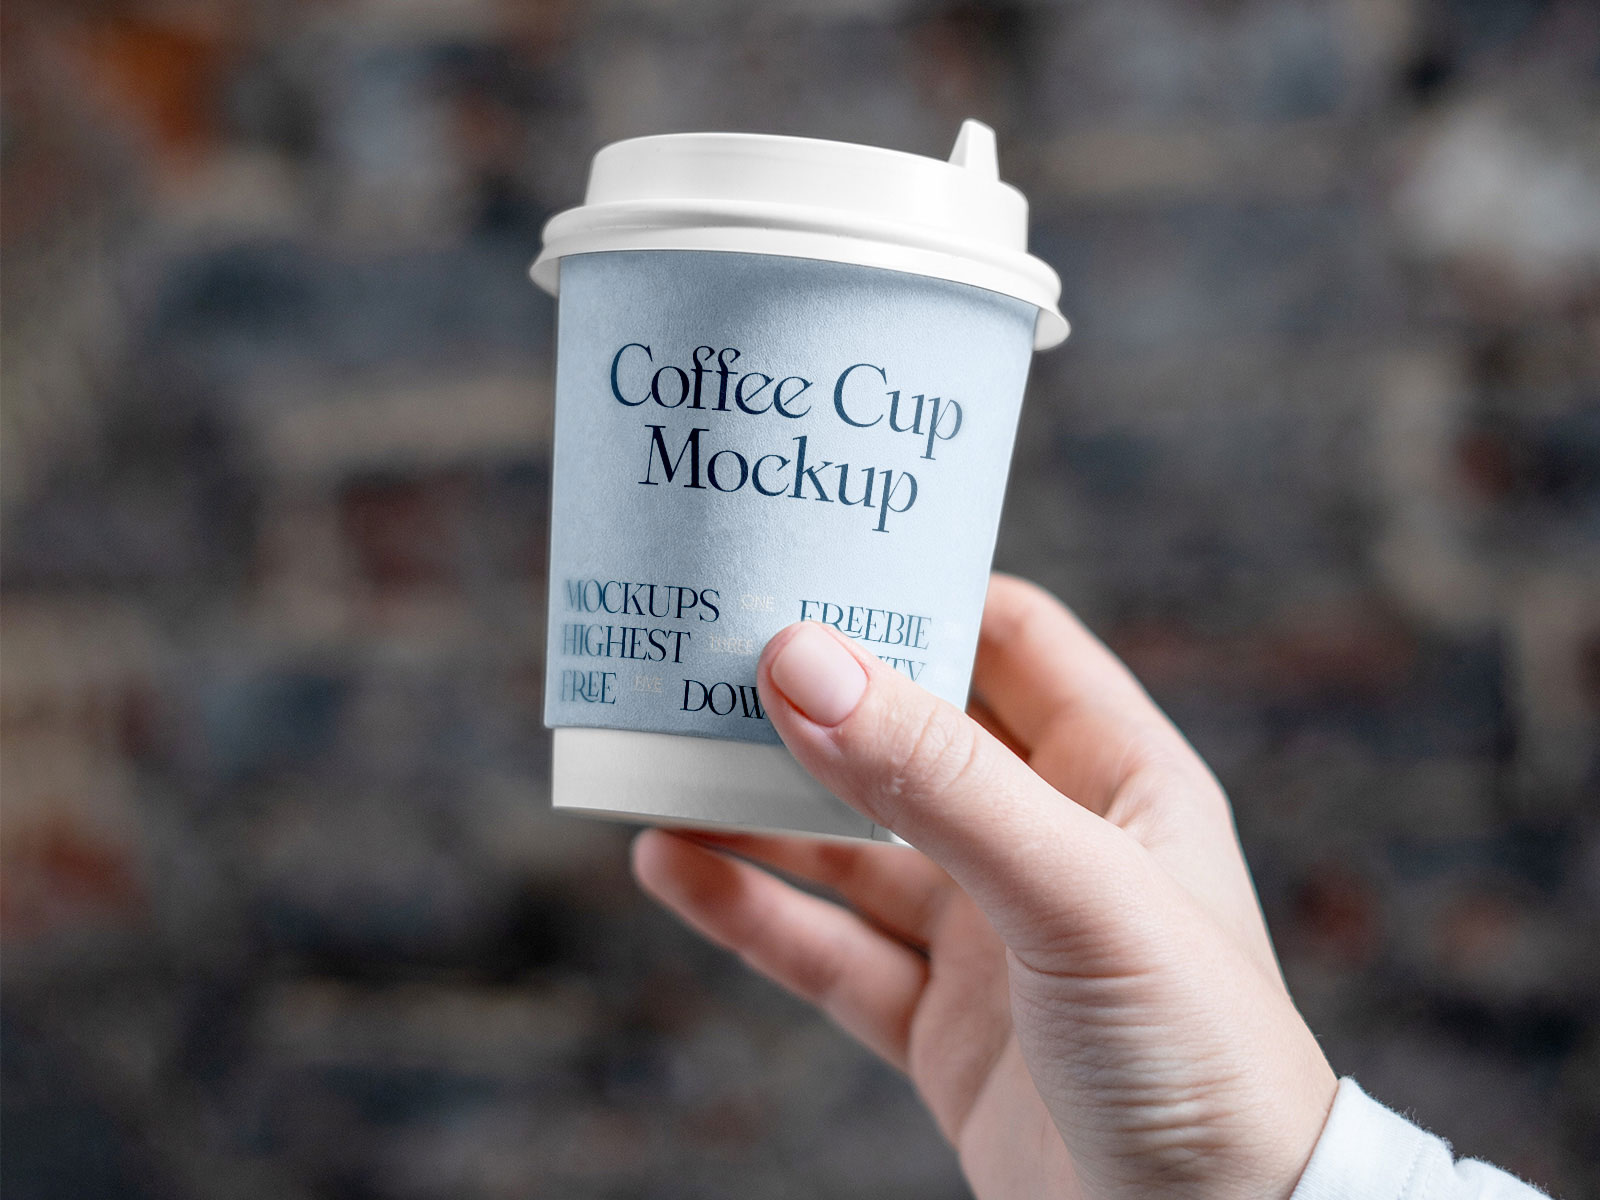 https://www.free-mockup.com/wp-content/uploads/edd/2023/01/Coffee-Cup-in-Hand-Branding-Mockup-Free-for-Download.jpg